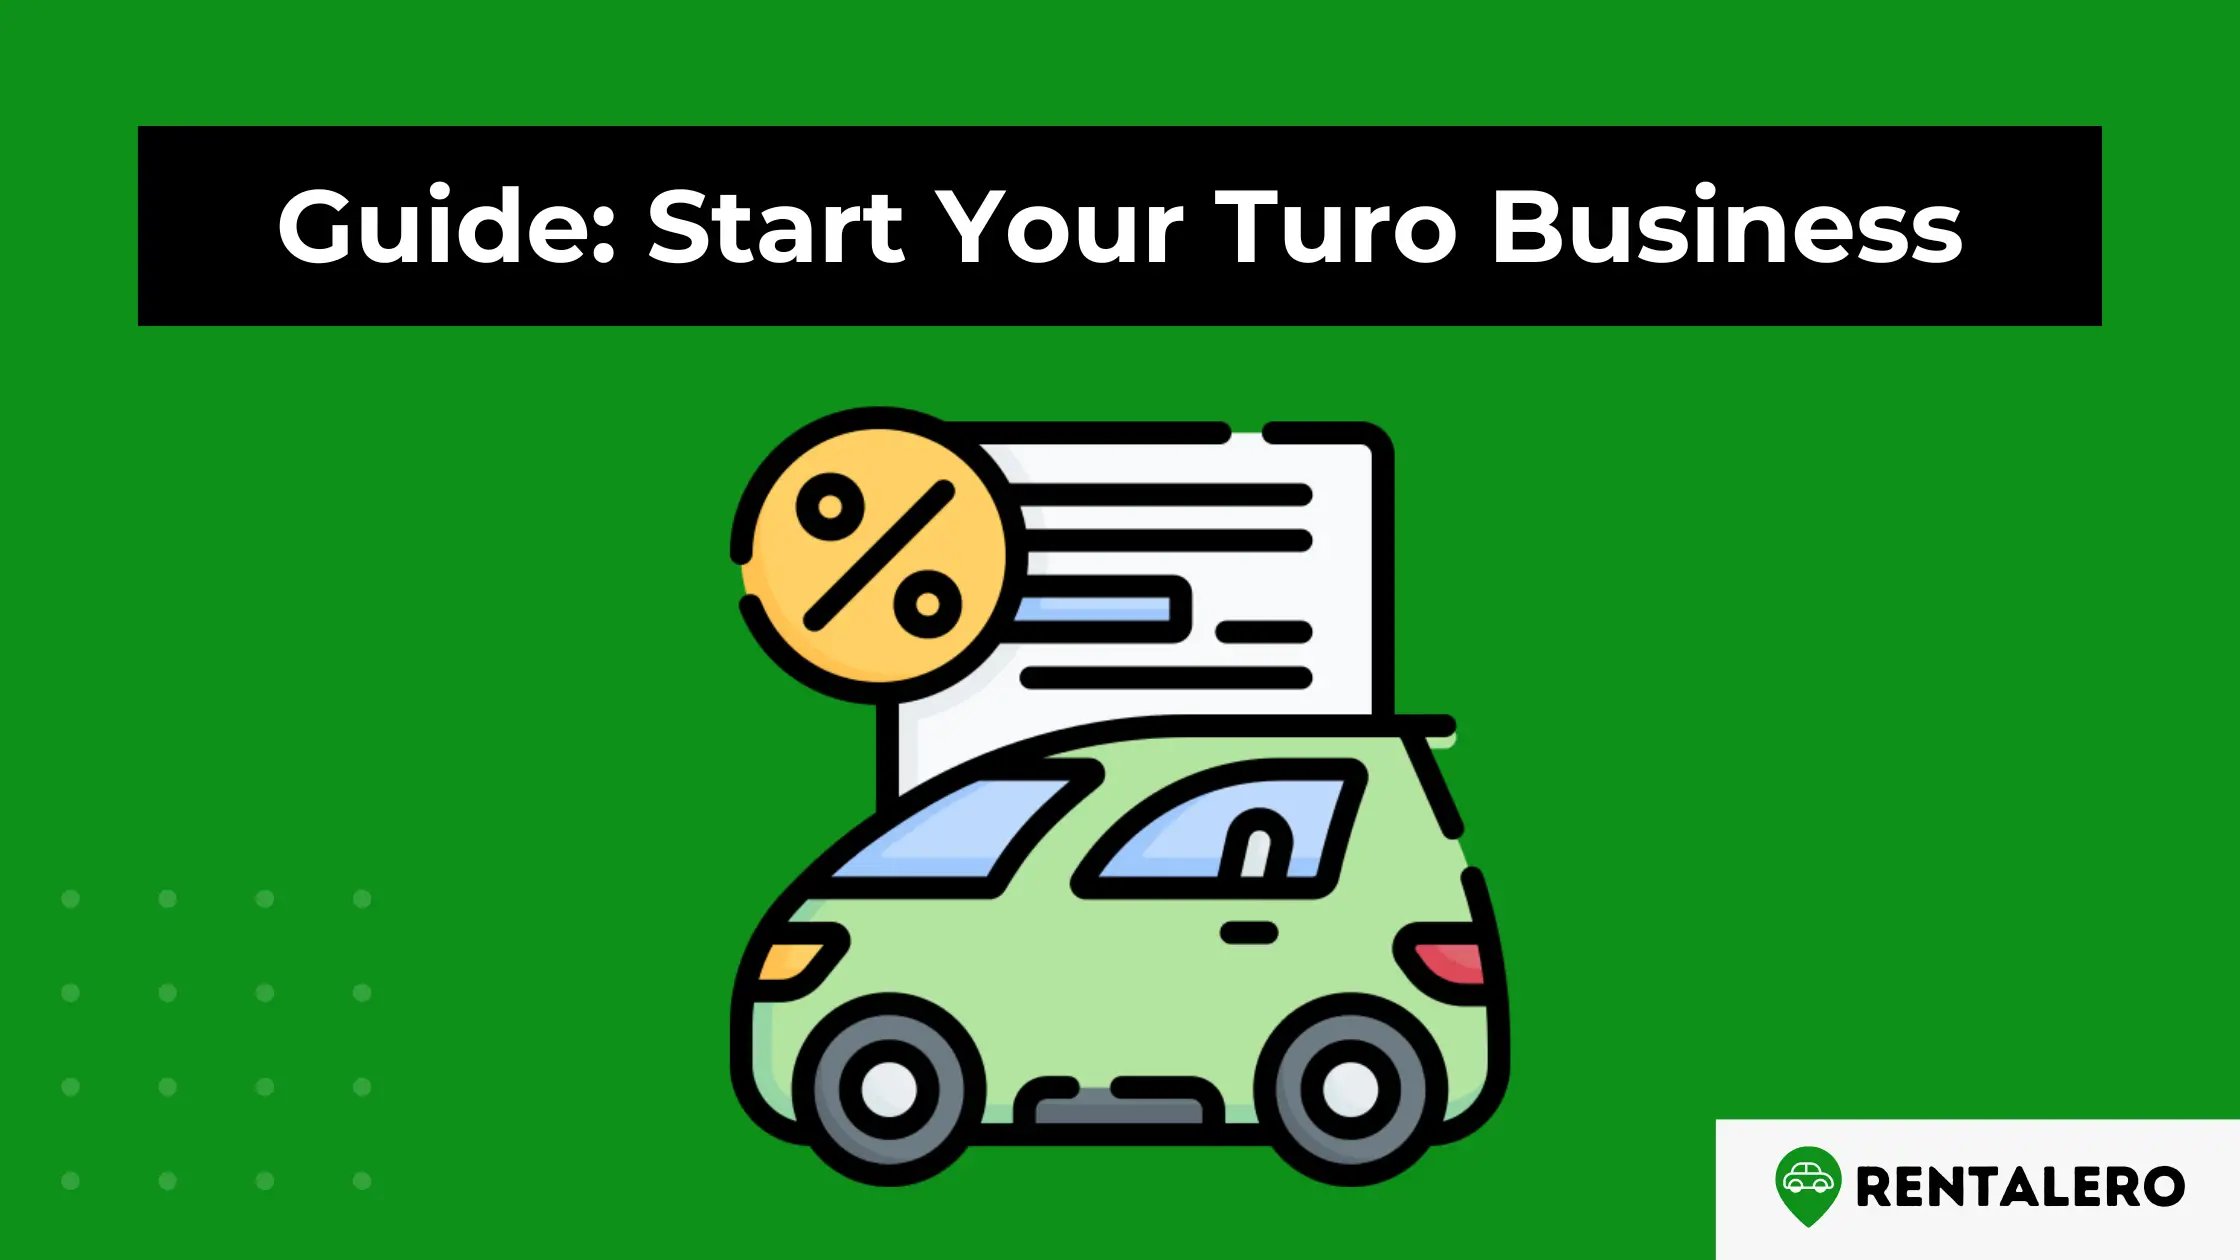 How to Start A Turo Car Rental Business: The Ultimate Step-by-Step Guide